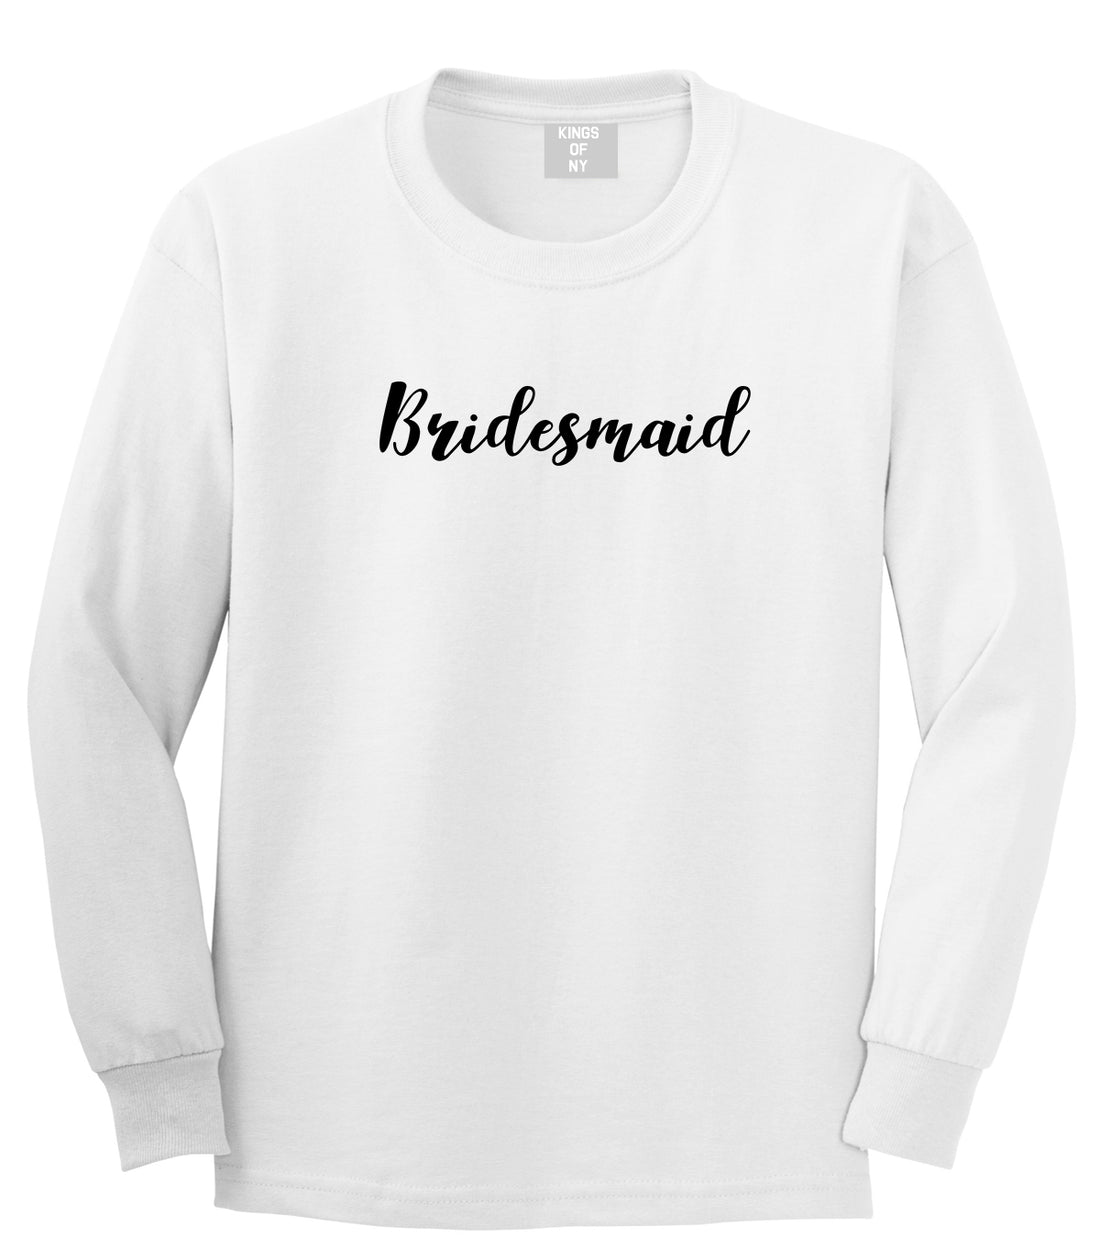 Bridesmaid Bachlorette Party White Long Sleeve T-Shirt by Kings Of NY